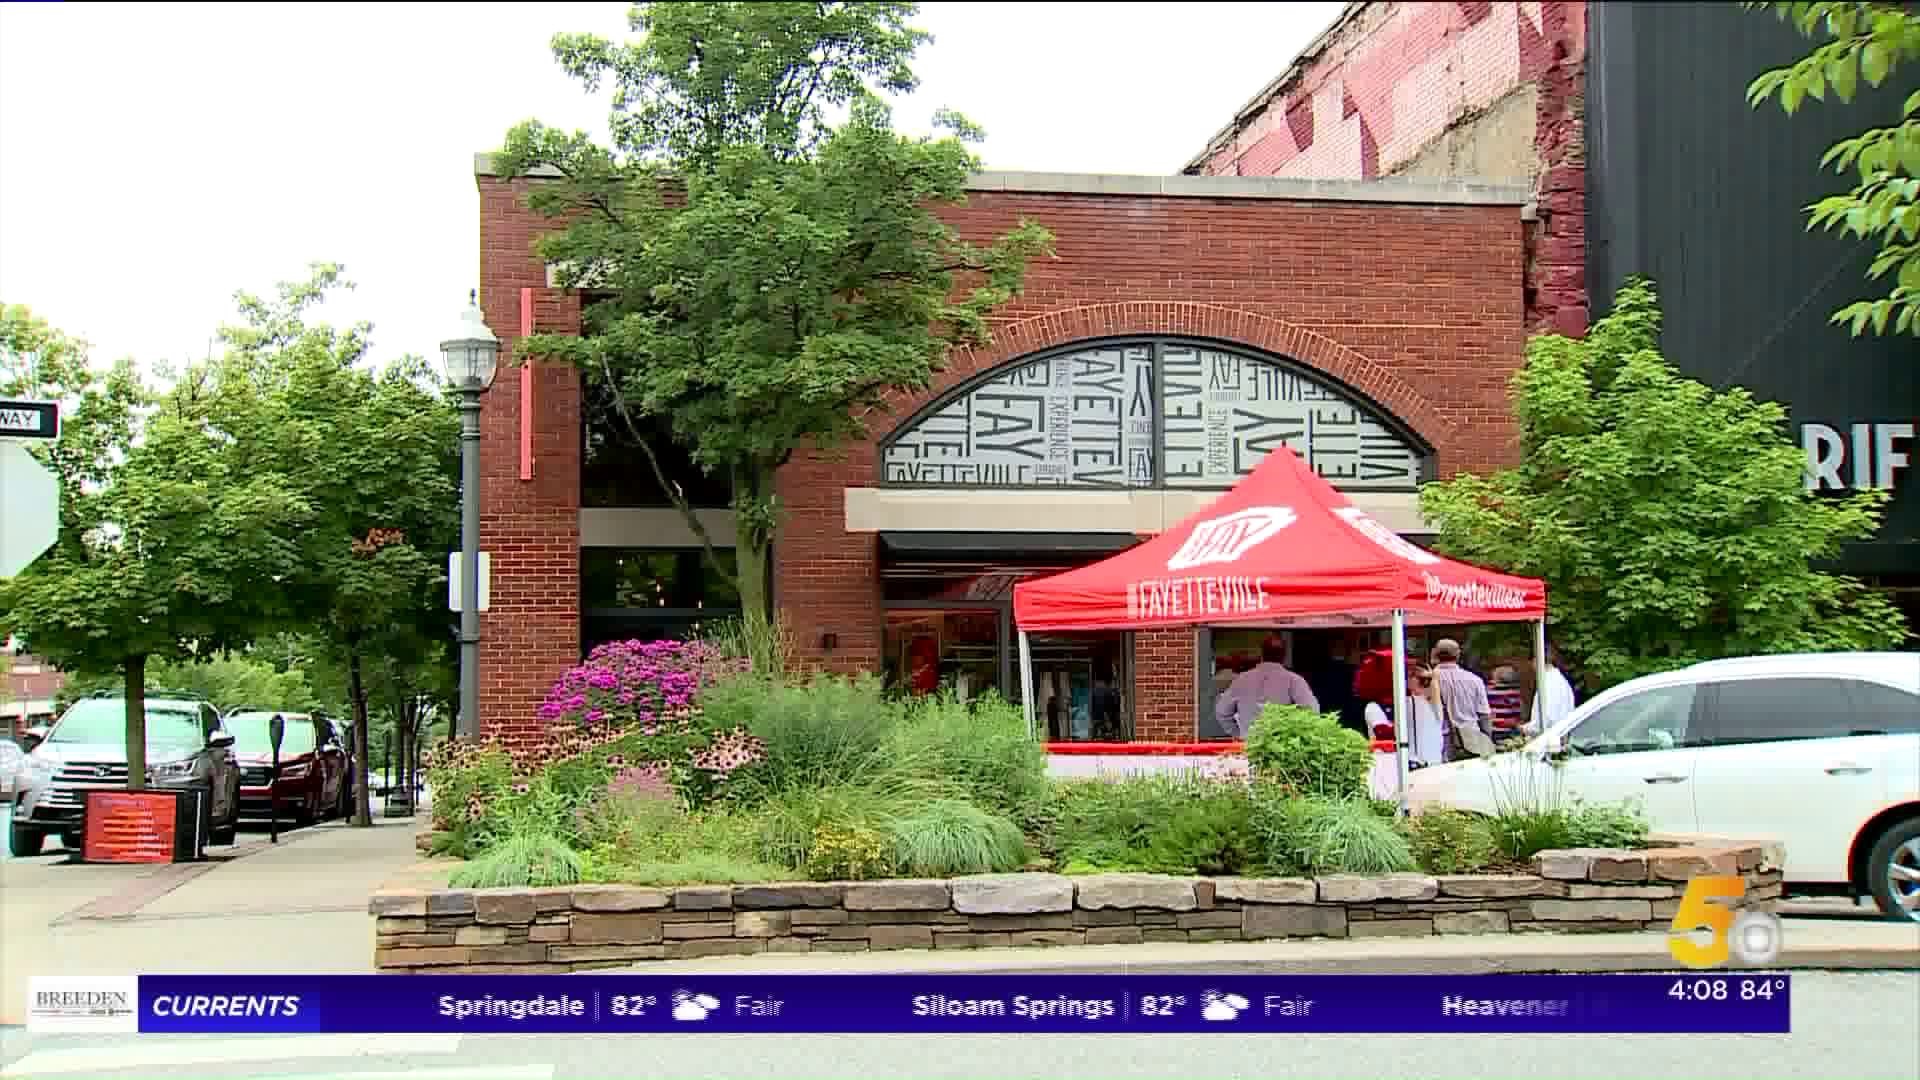 Fayetteville Visitors Center Reopens After Renovations